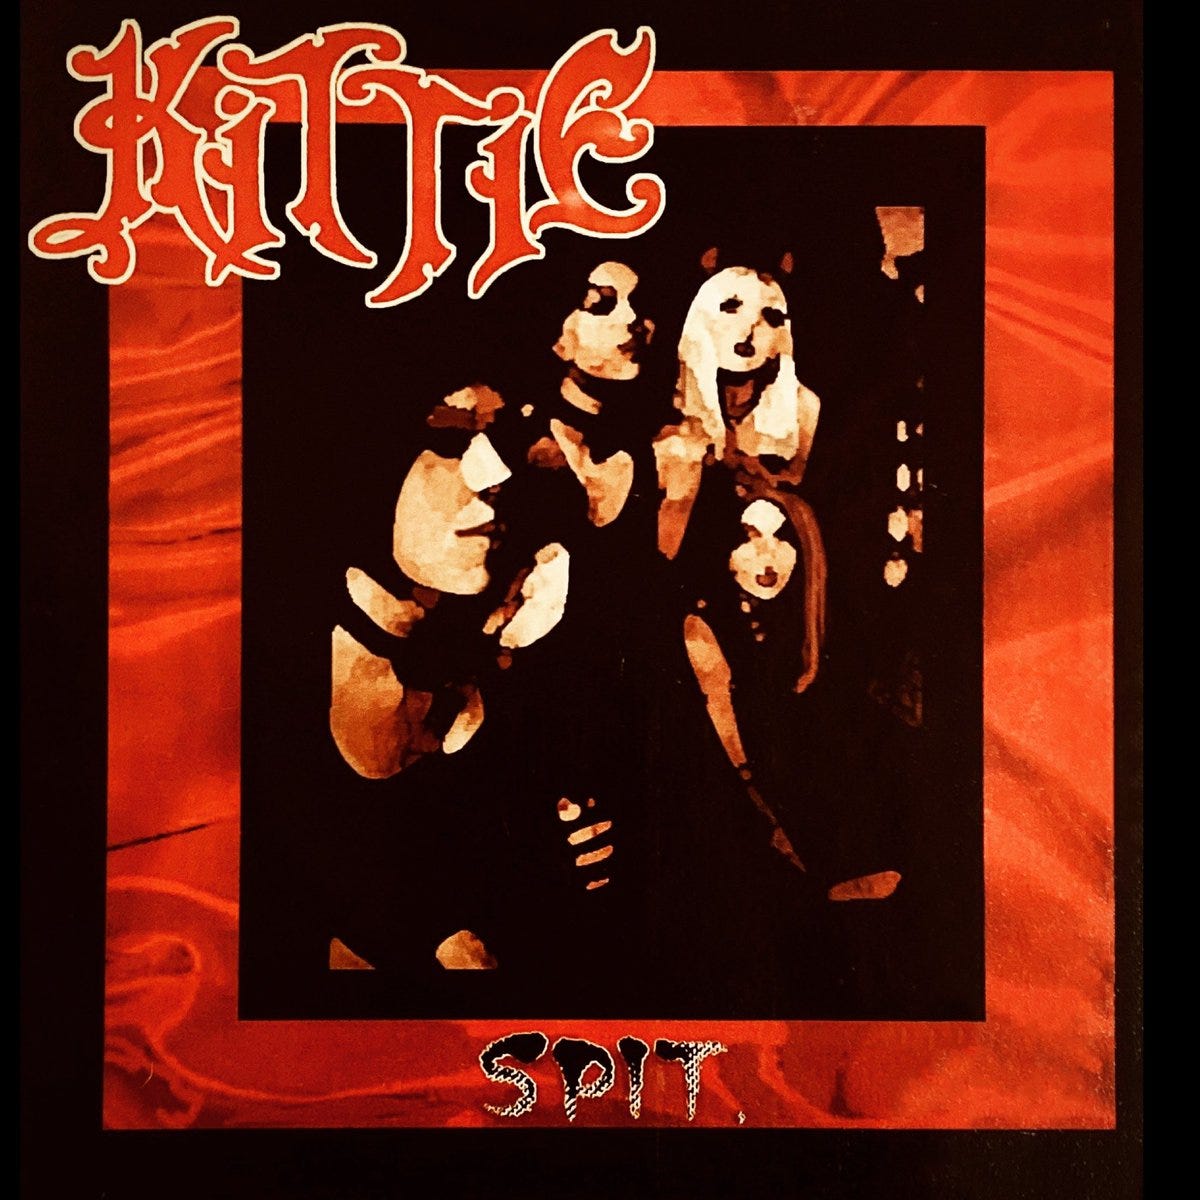 The cover for Kittie’s SPIT. It shows a painting of the band gathered in a group, kind of looks like one of those deals where they paint over the photo, mostly done in tones of black and tan. The picture has a red border, which i think is a photo of red satin sheets.